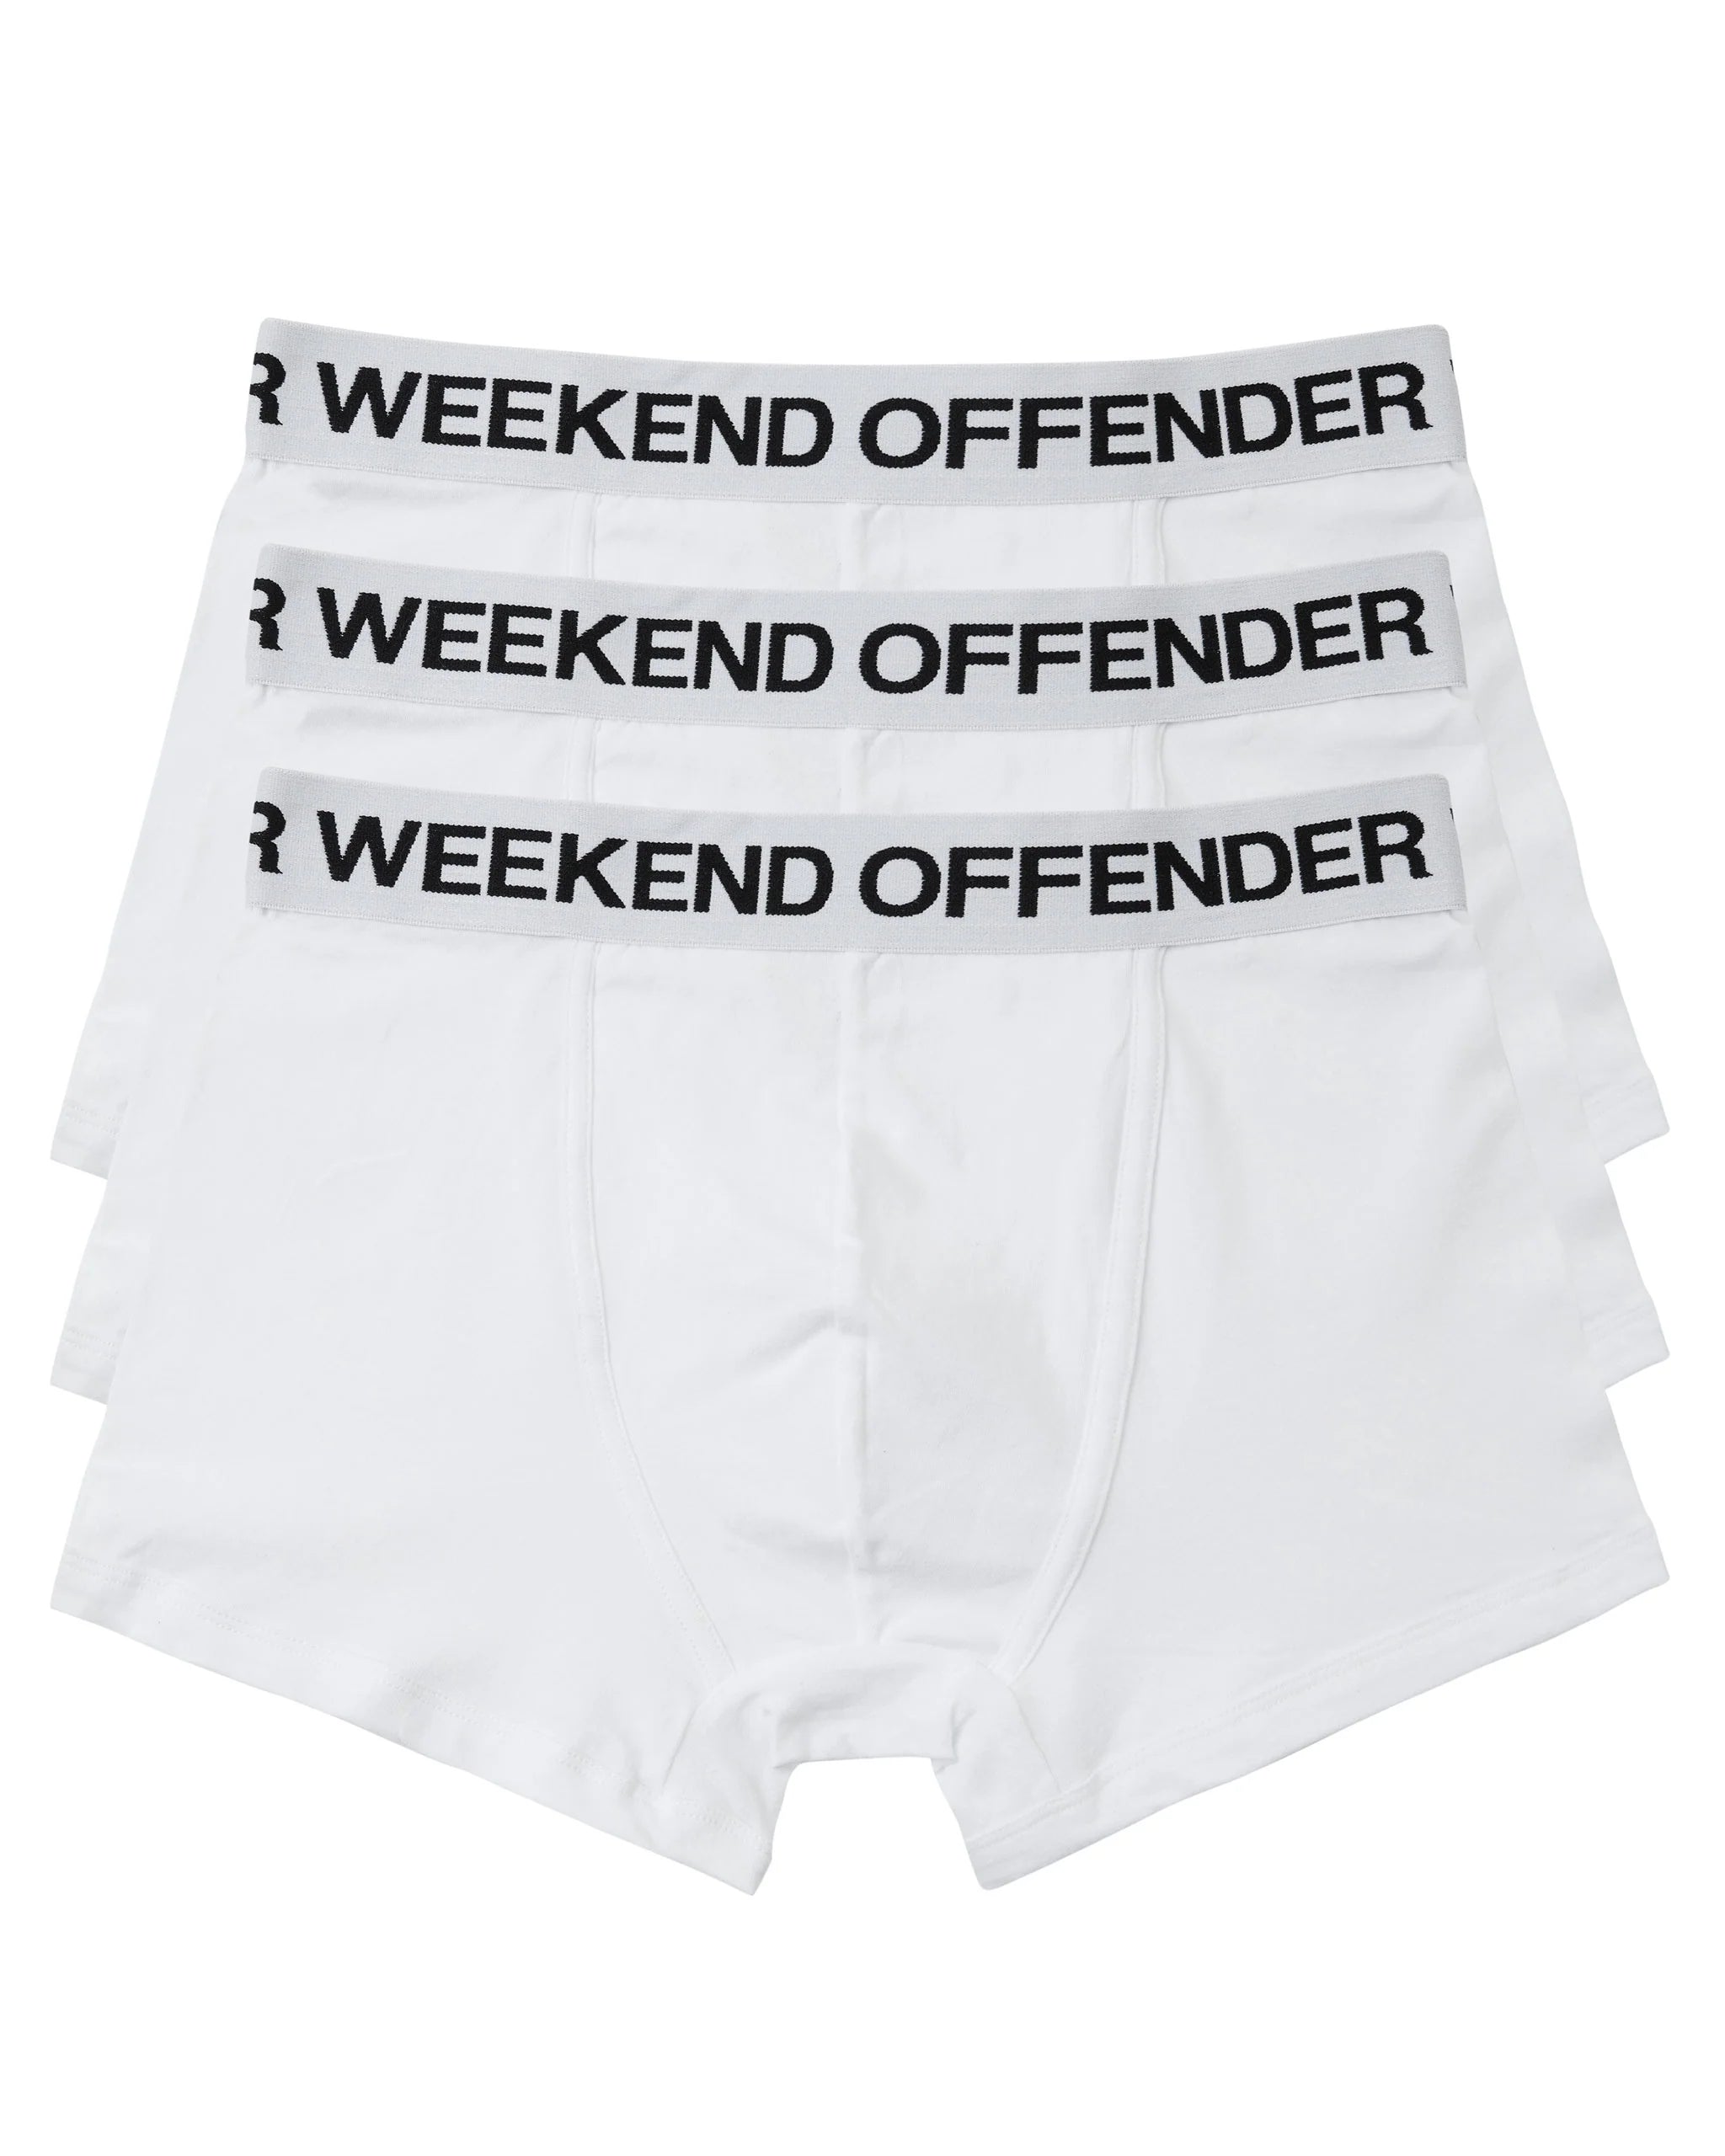 Weekend Offender 3 Pack Branded Boxer Shorts White